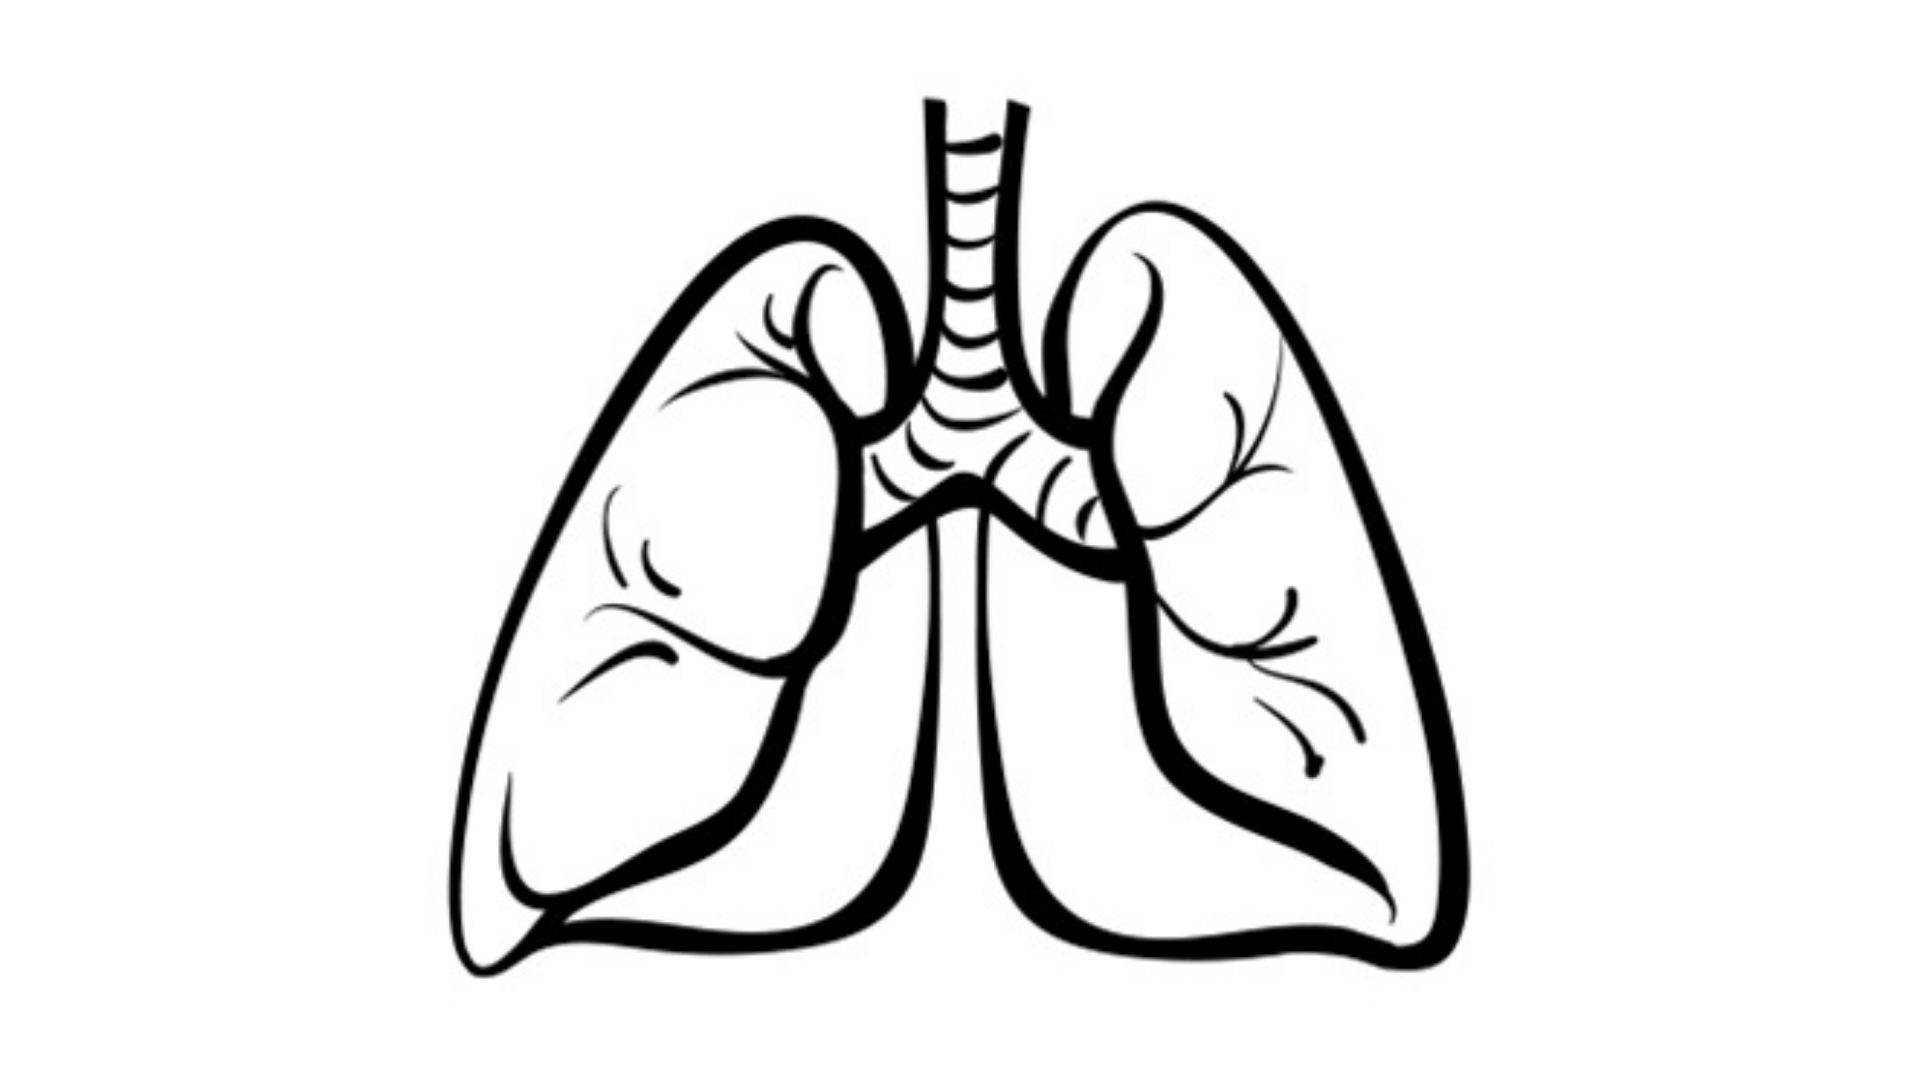 Underused Next-Generation Sequence Testing Revealed in MYLUNG Consortium Study